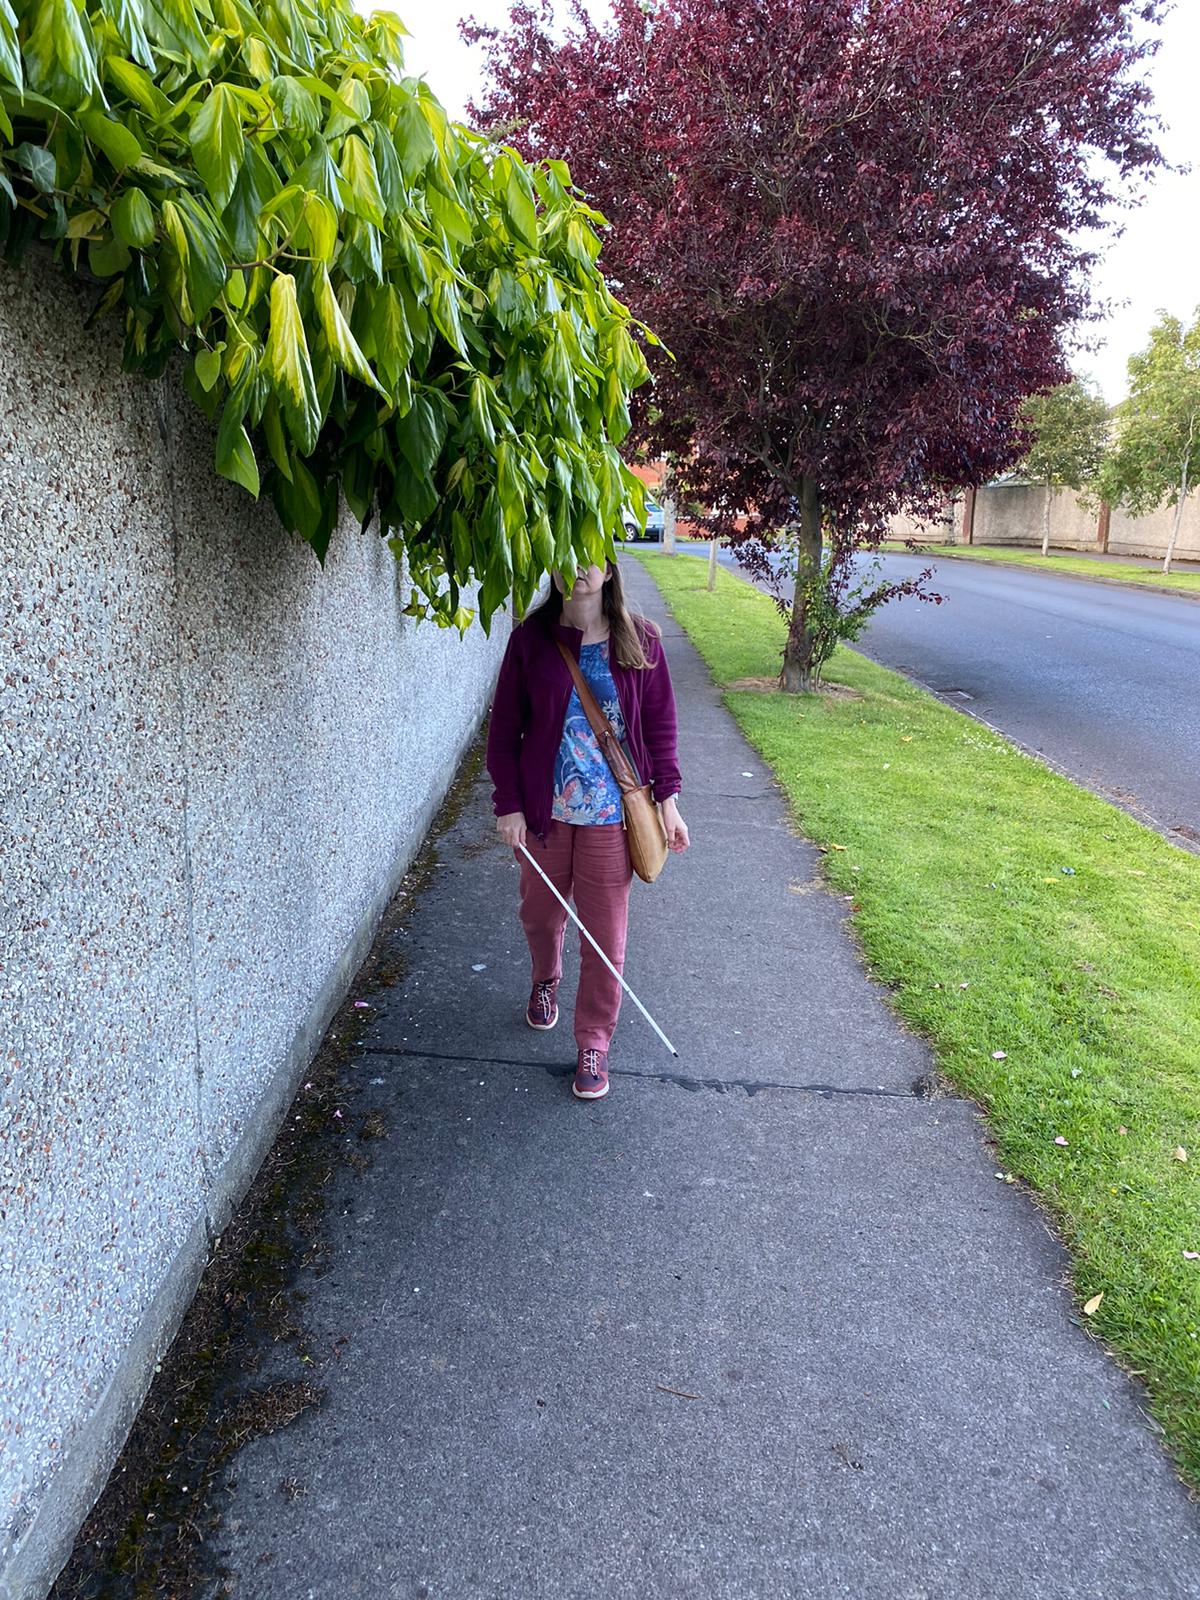 The image shows a woman walking with a white cane into branches which are hanging over a wall along a pathway.